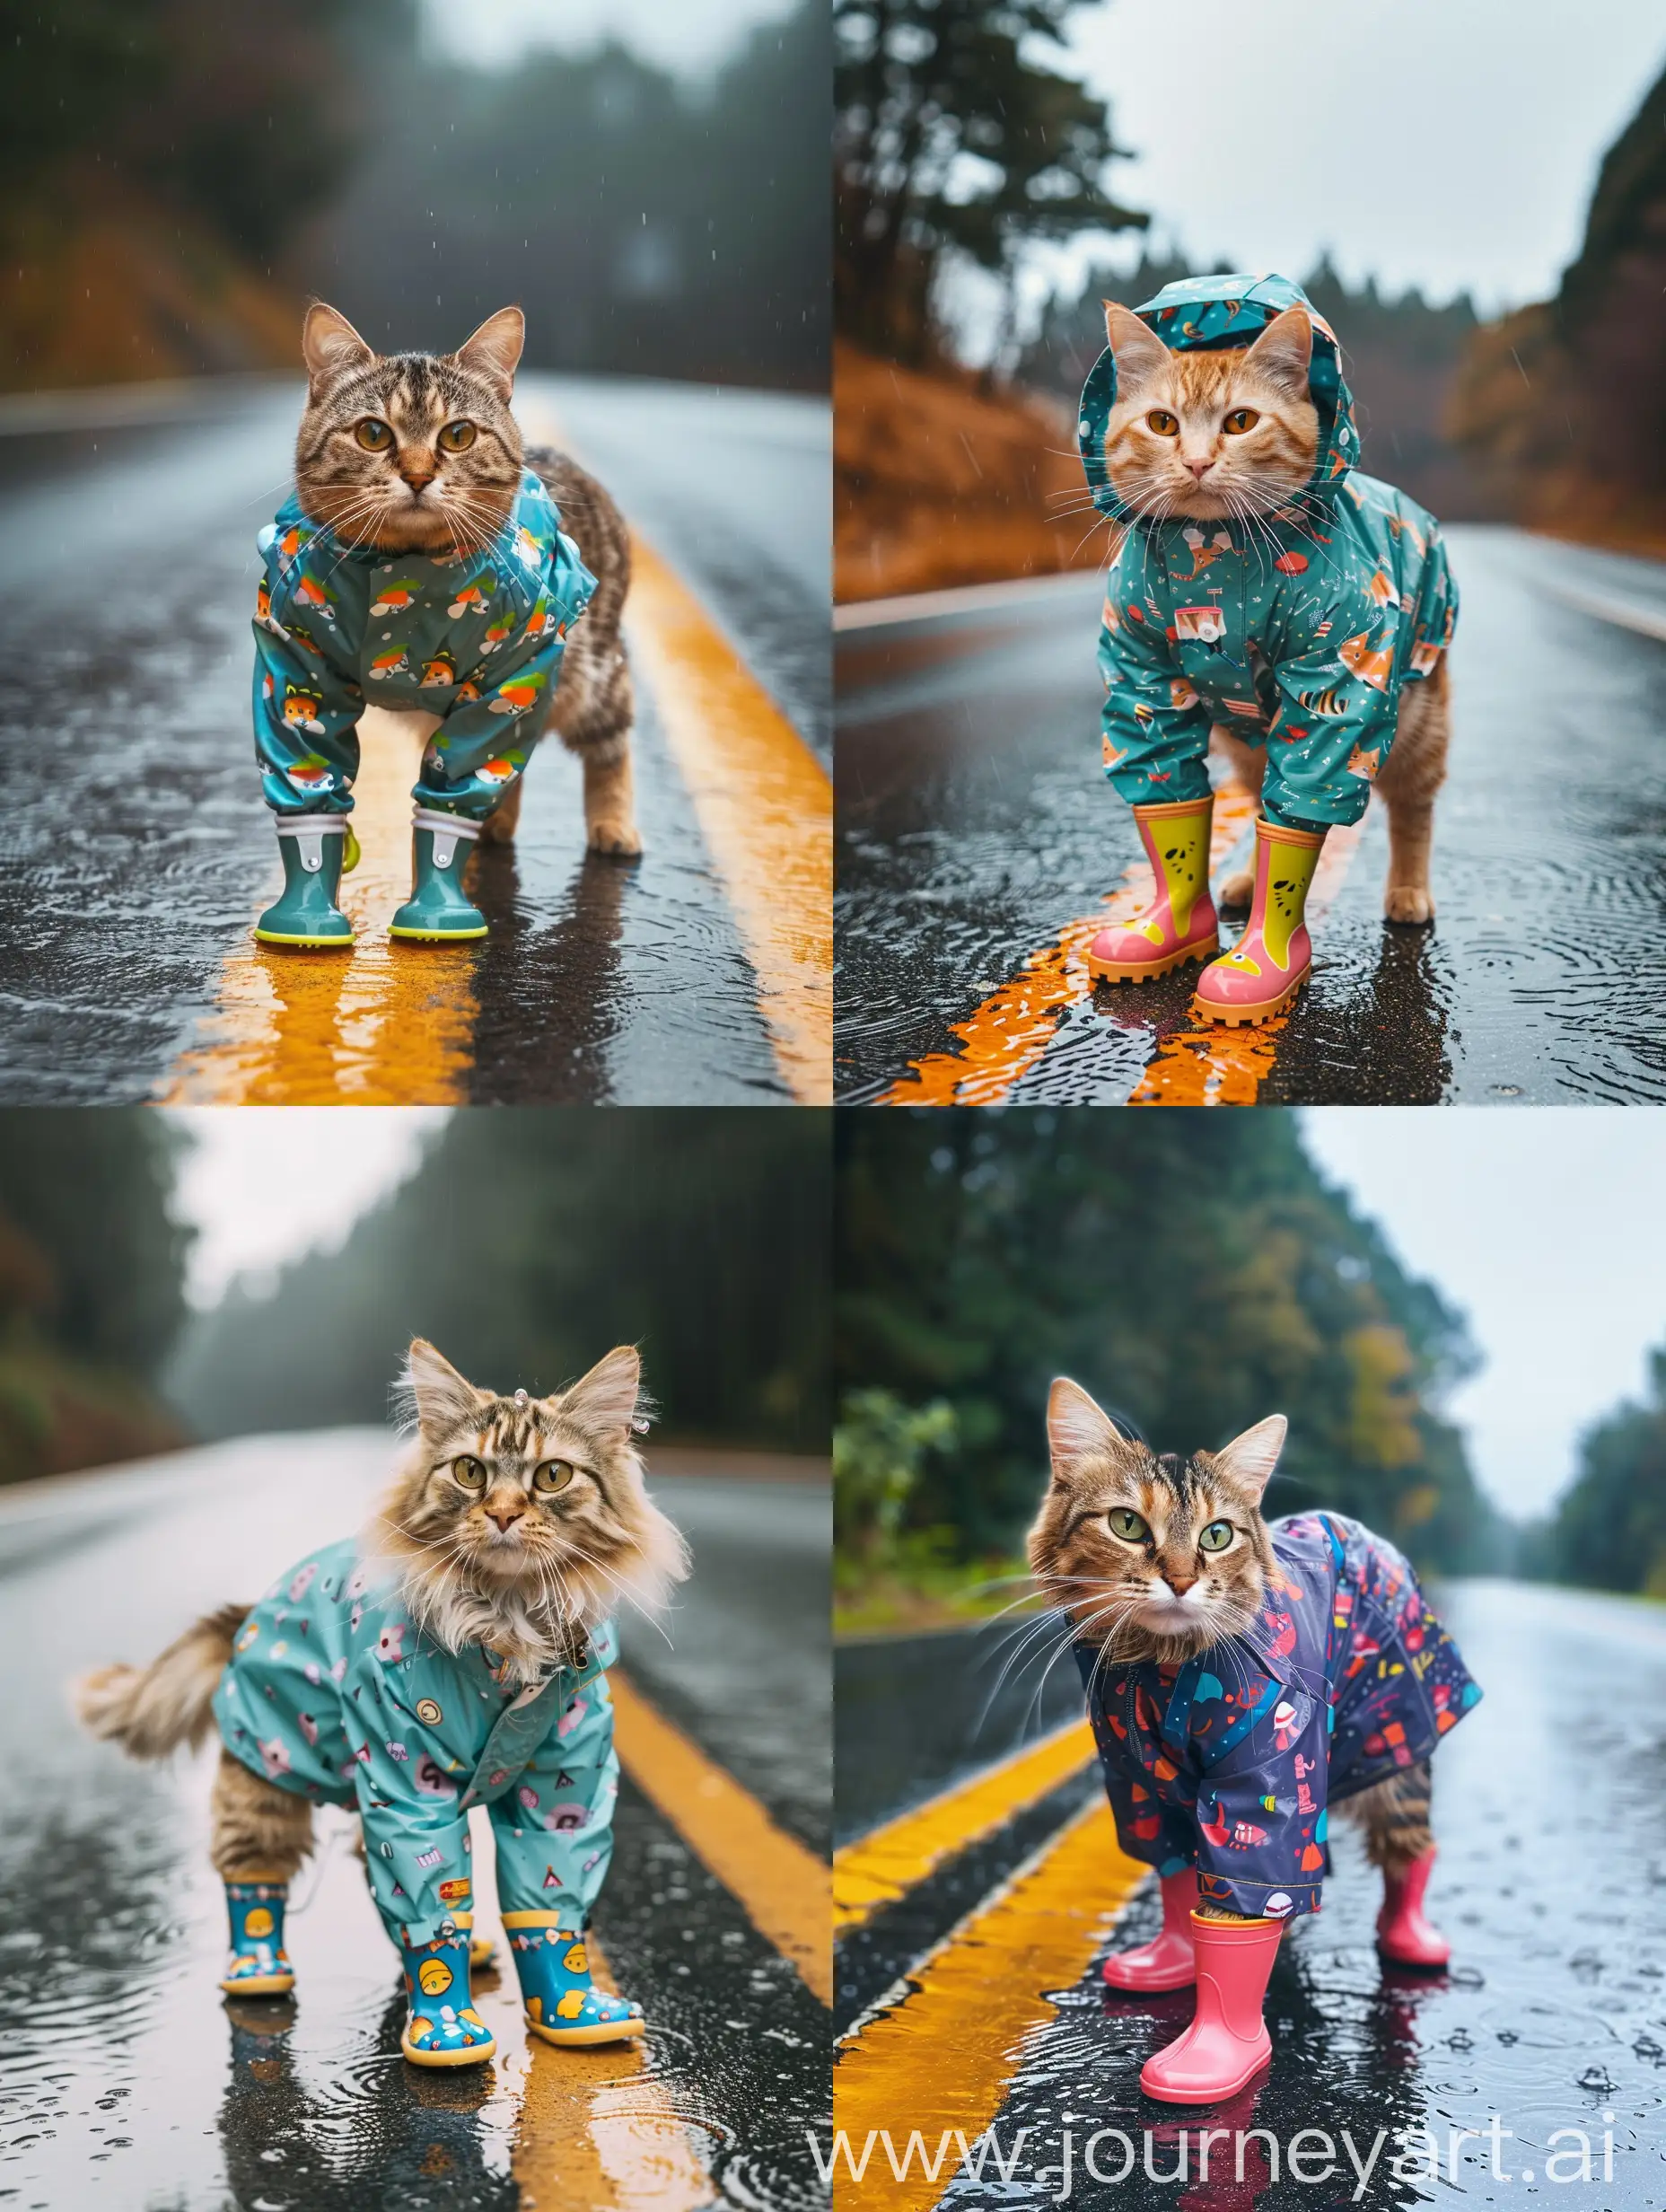 Adorable-Cat-in-Raincoat-and-Boots-on-Rainy-Day